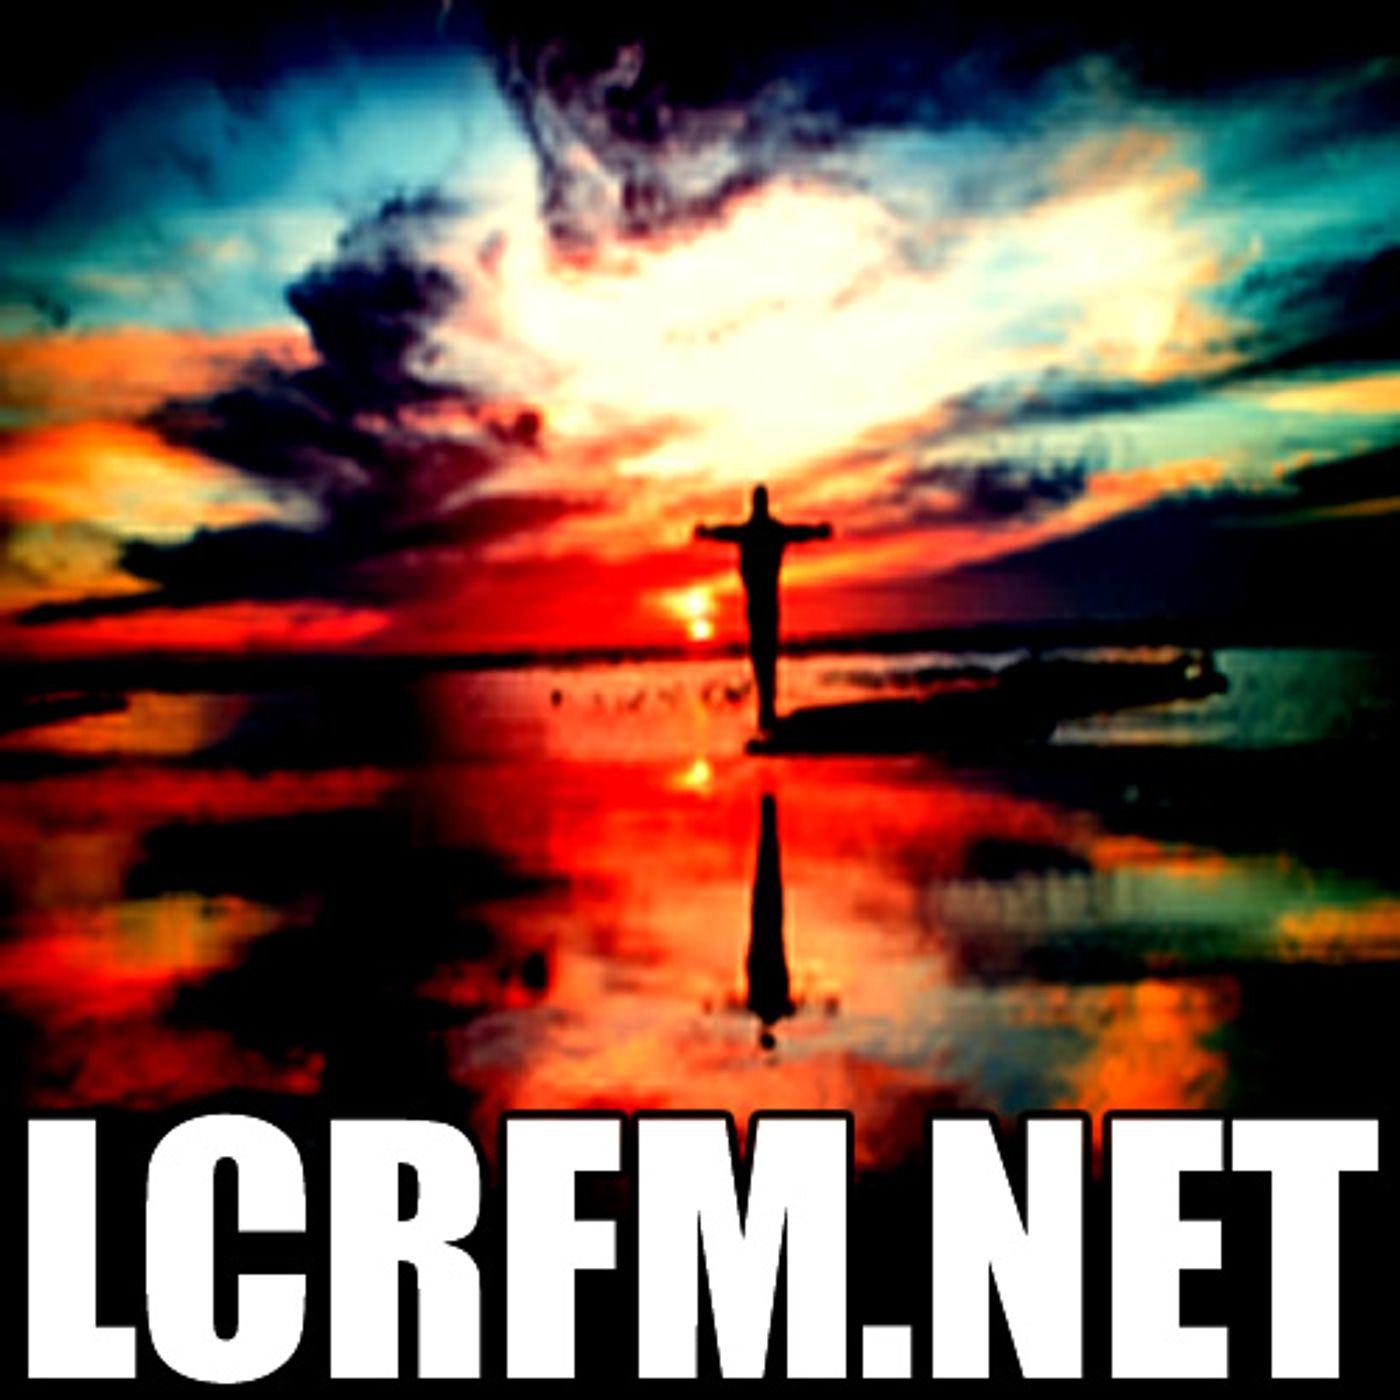 "LIFE WHAT IS IT NOW? ".. 07 August ... LCRFM NET... "THE LONDON CALLING RADIO SHOW... @8PM-GMT...